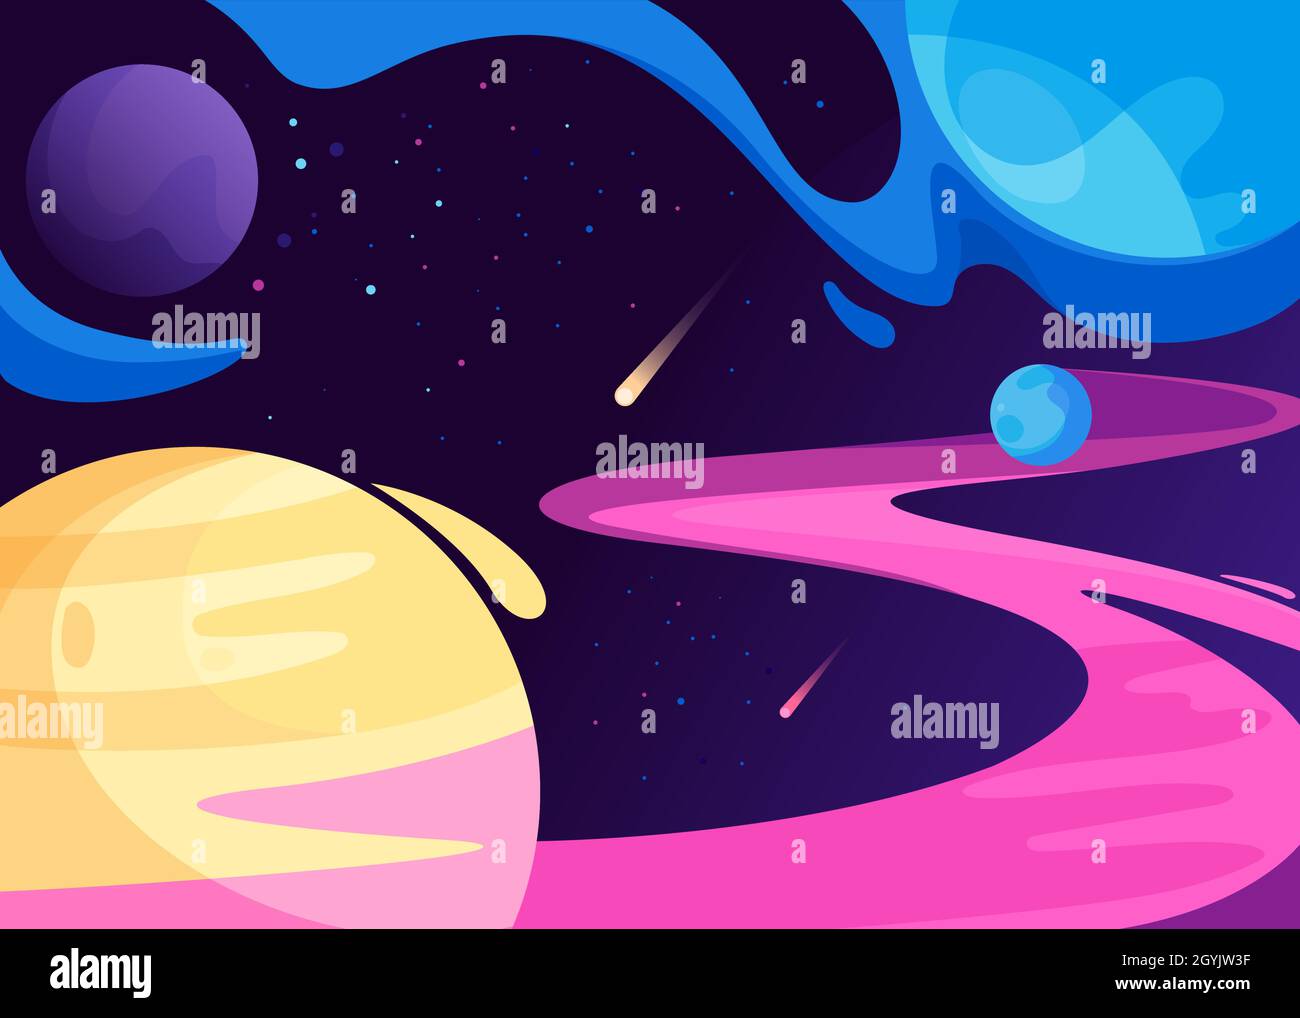 Banner with planets in space. Placard design in abstract style. Stock Vector